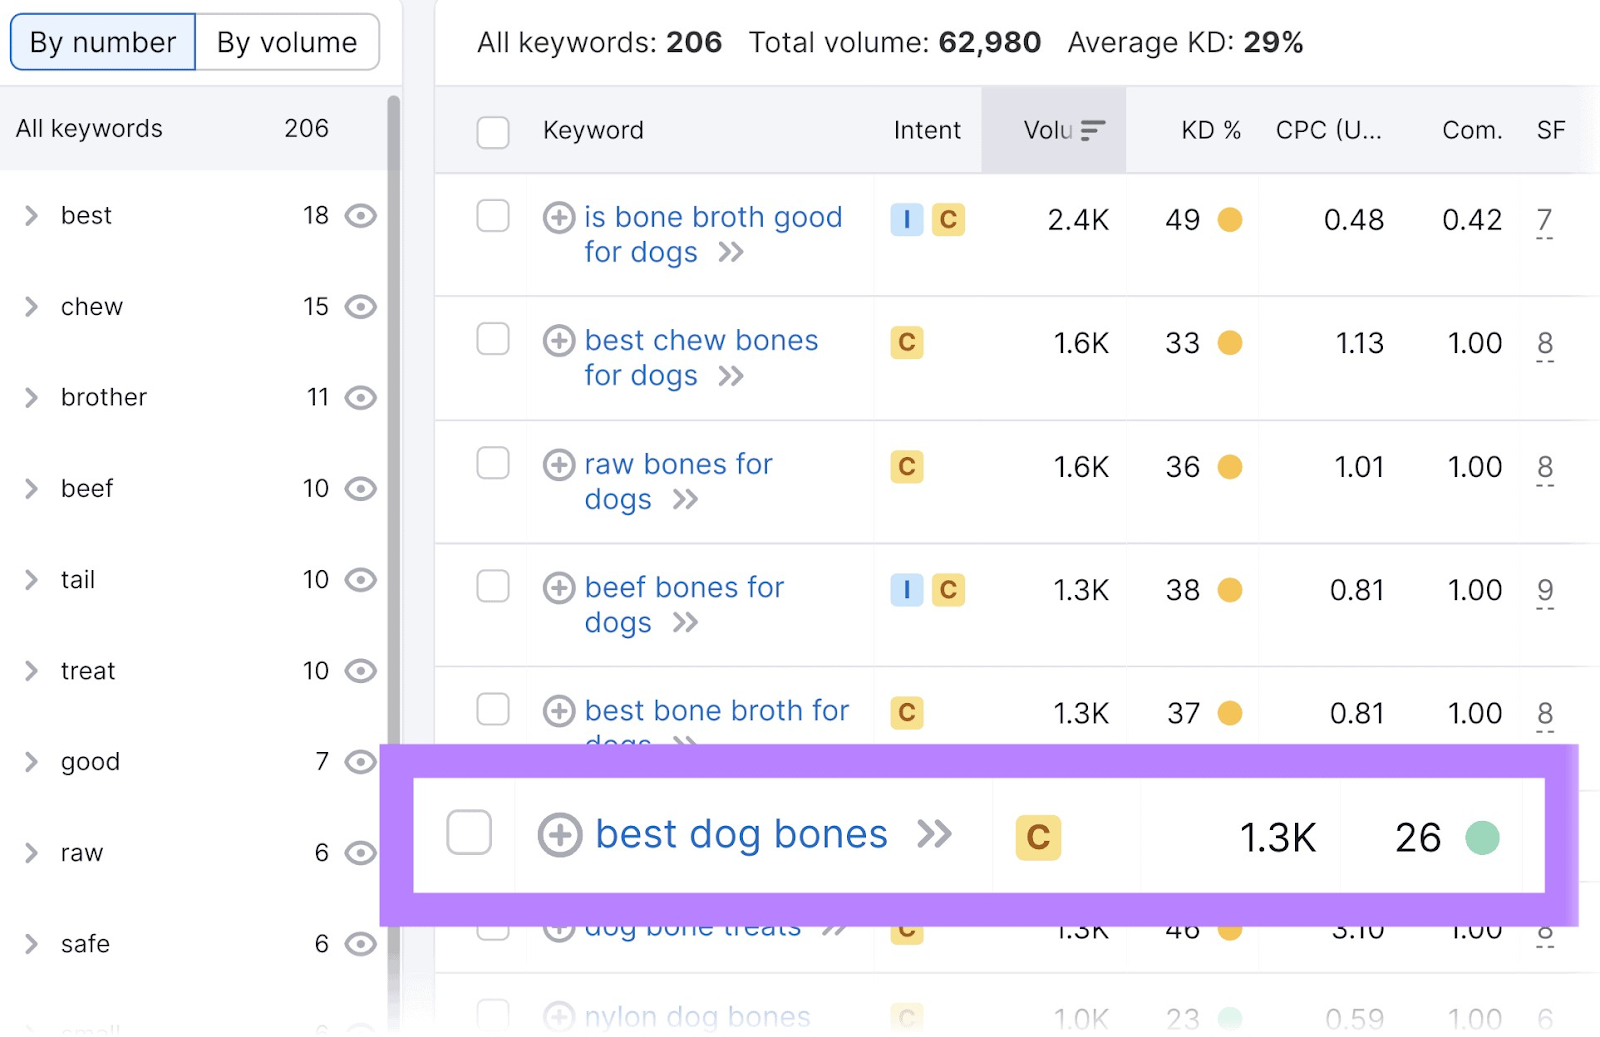 “best dog bones” results highlighted, showing 1.3K volume and 26% keyword difficulty